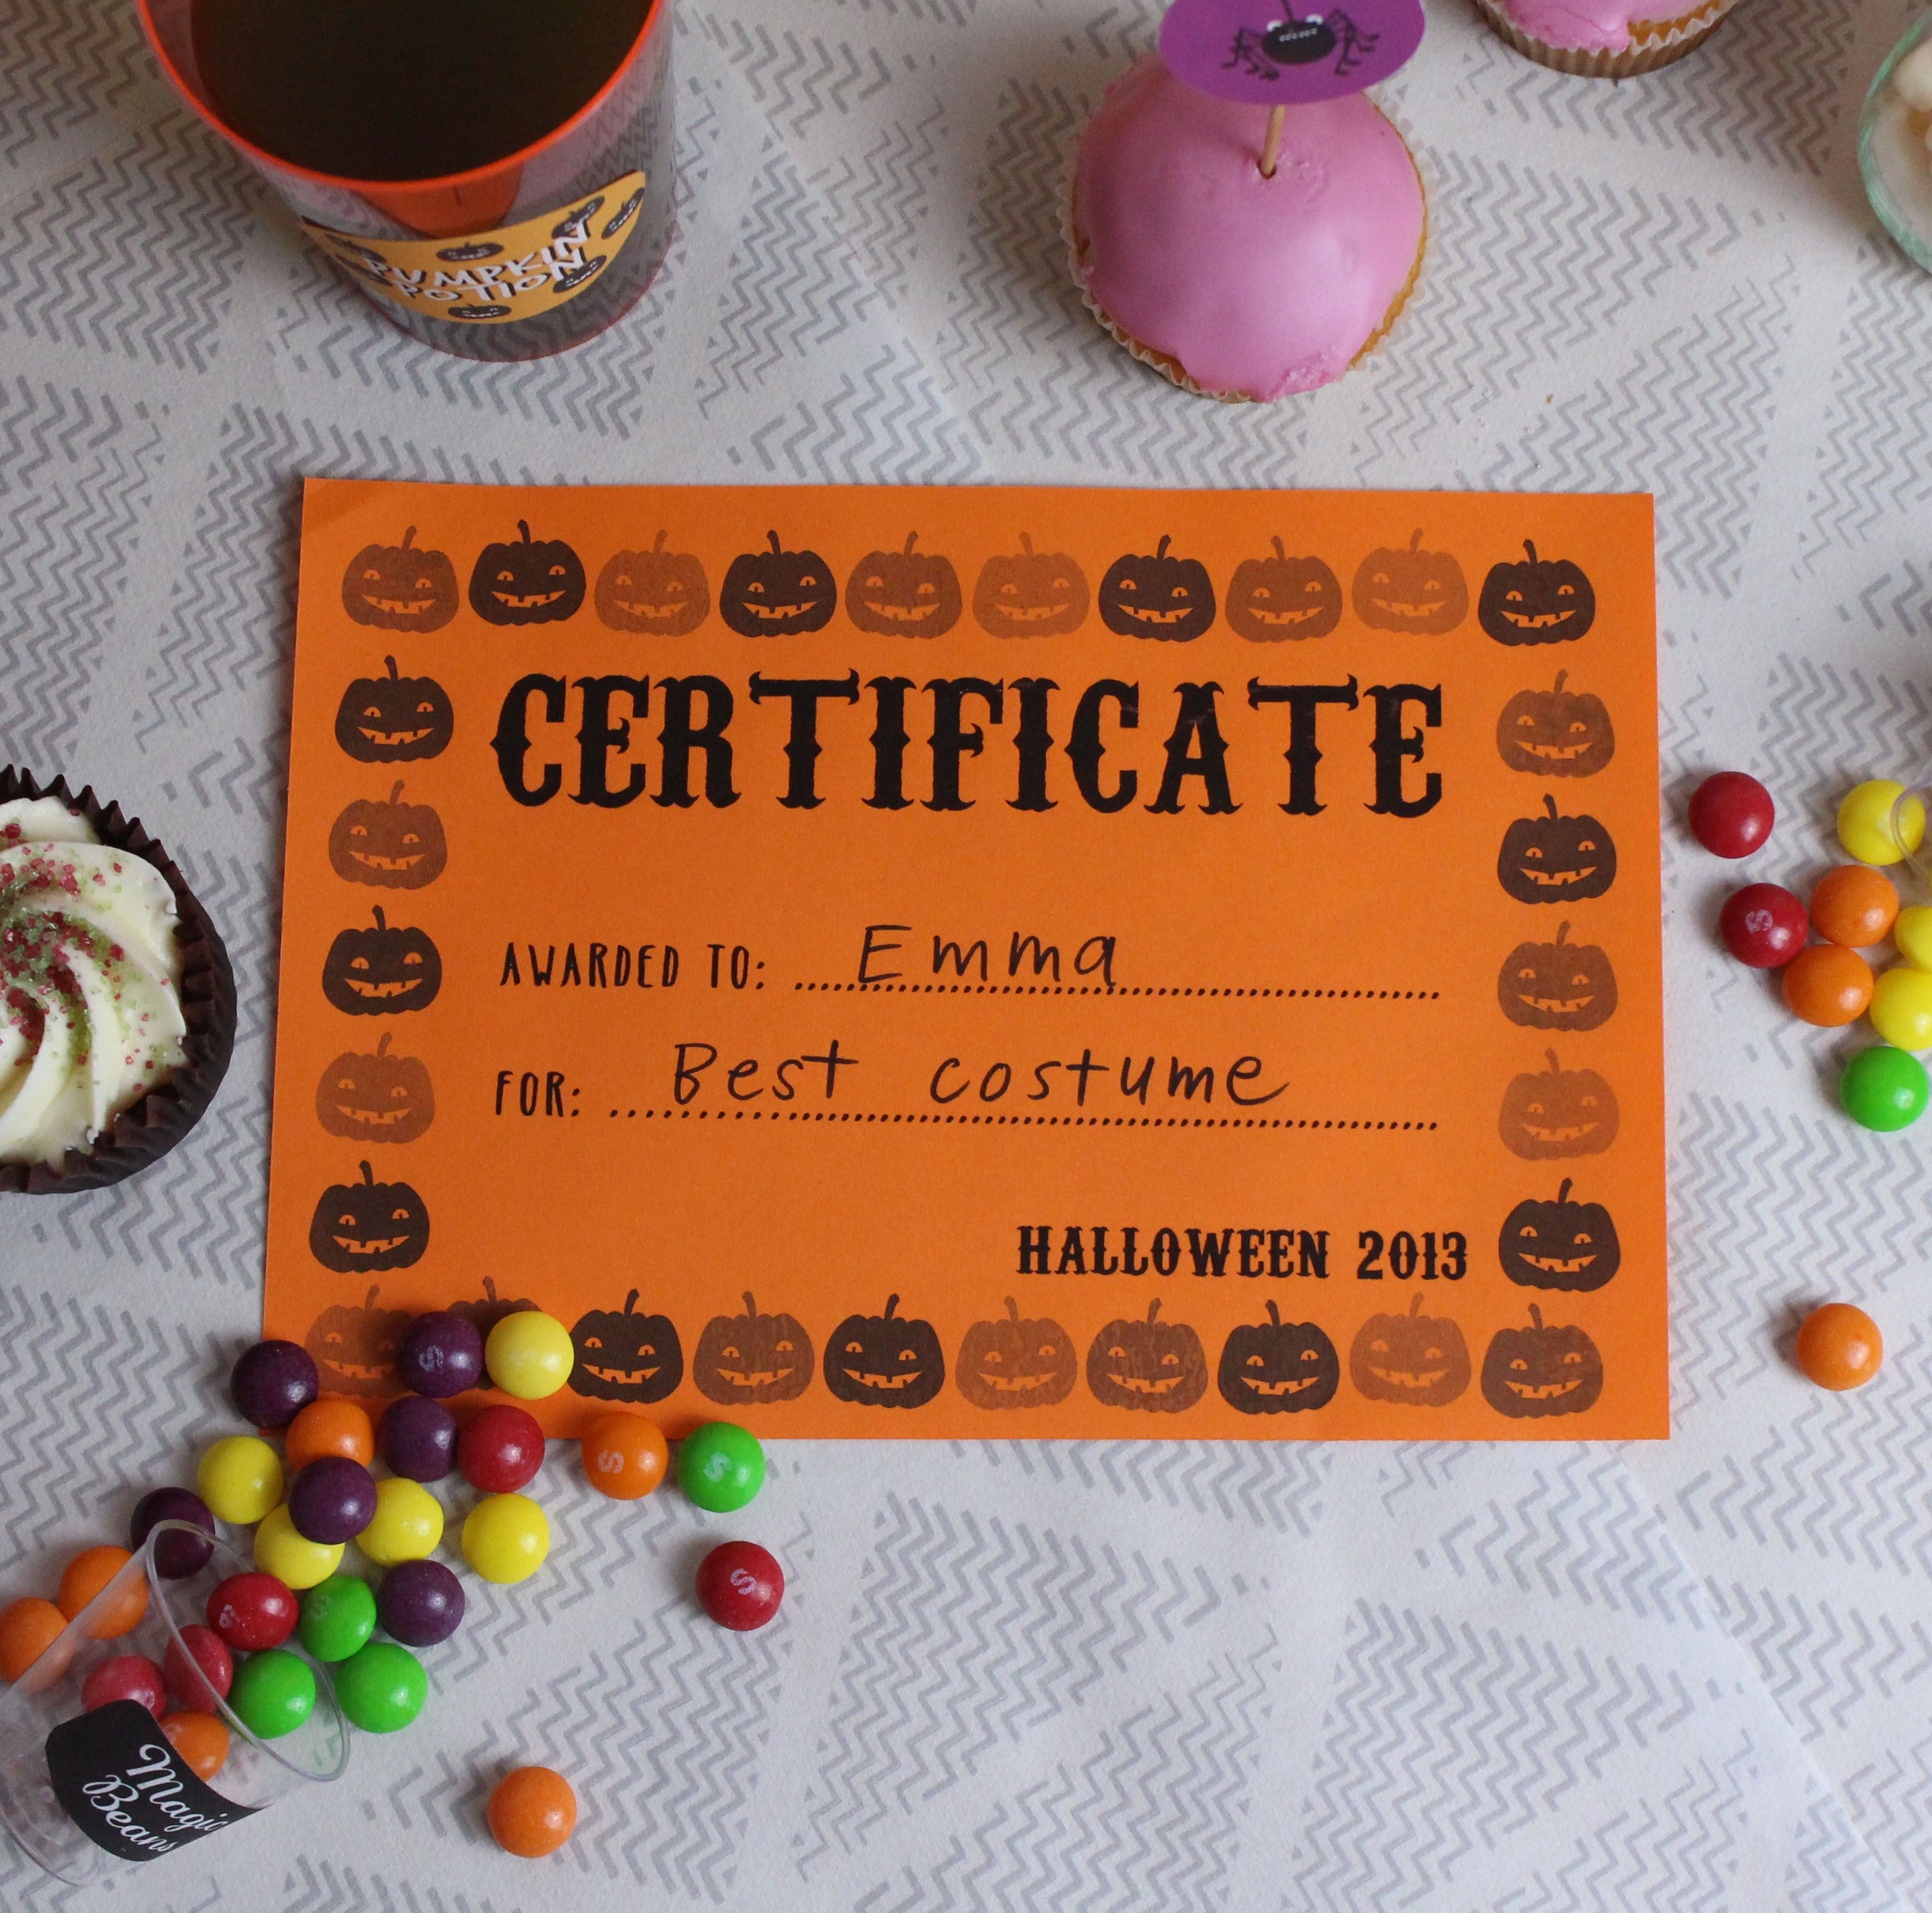 Free Printable Certificates For Halloween! | Our Halloween Party - Best Costume Certificate Printable Free